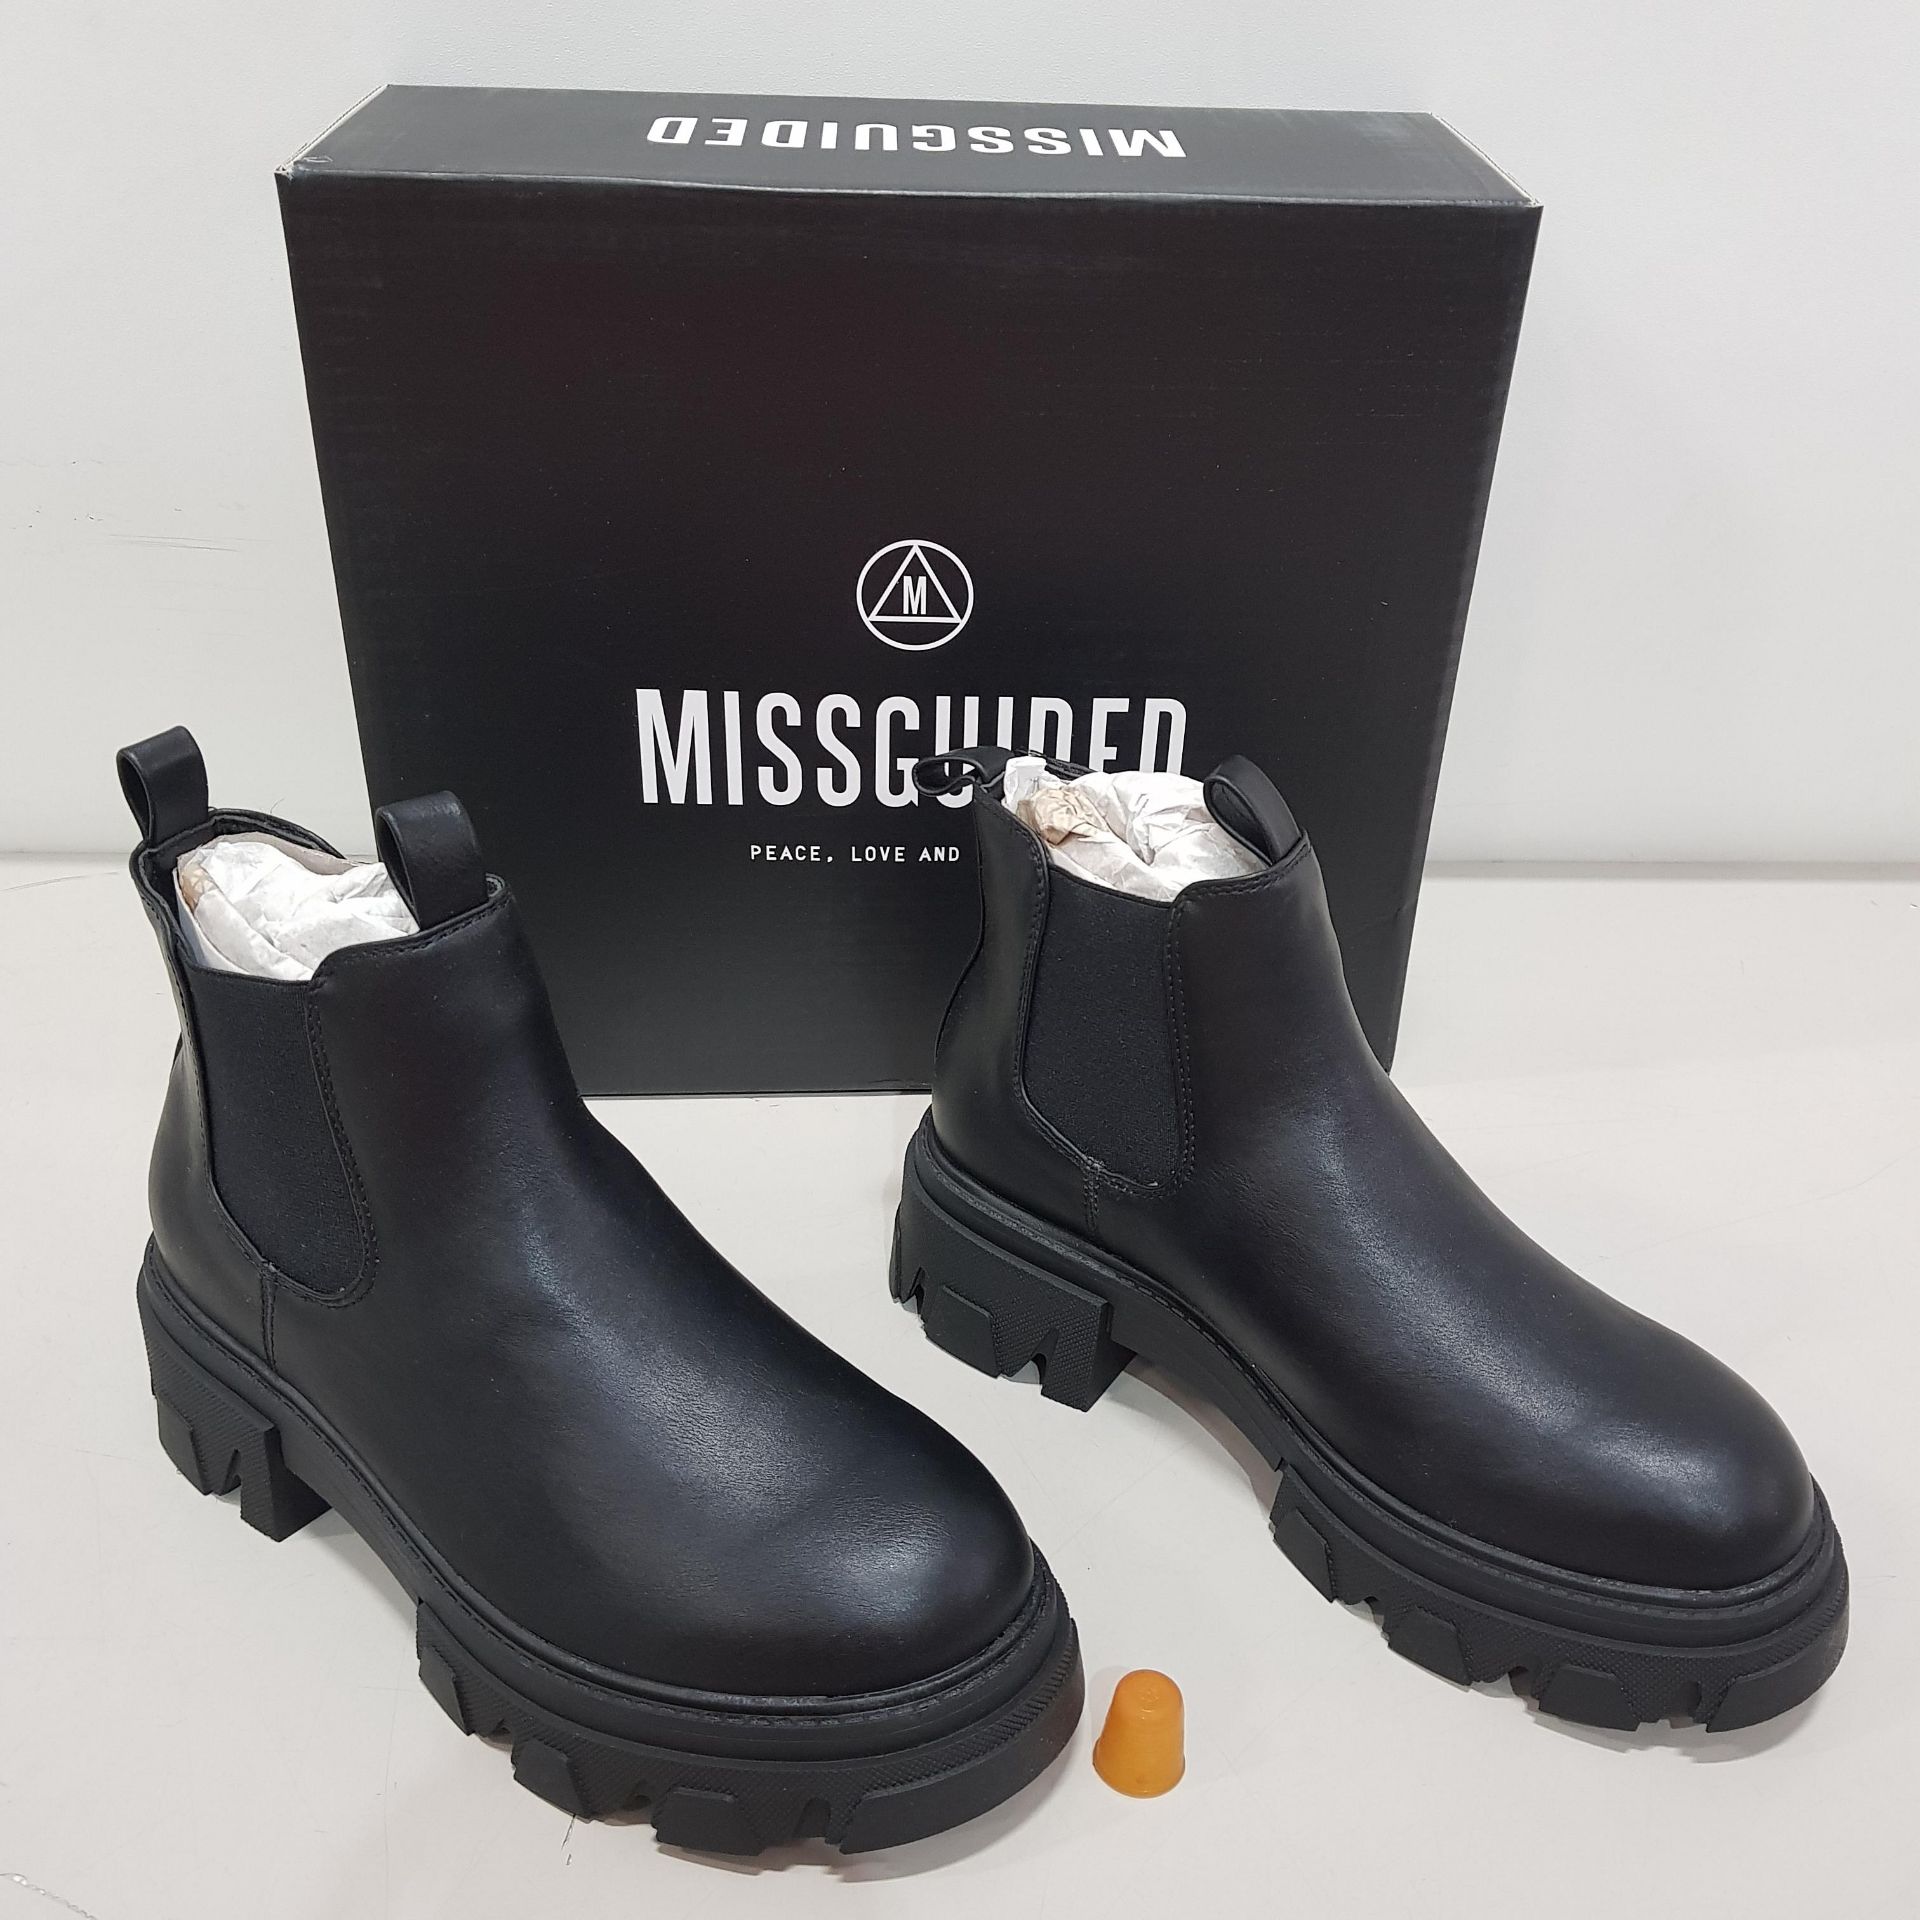 15 X BRAND NEW MISSGUIDED BLACK FAUX LEATHER CHUNKY DOUBLE TAB CHELSEA BOOTS IN SIZE 6 - RRP-£45.